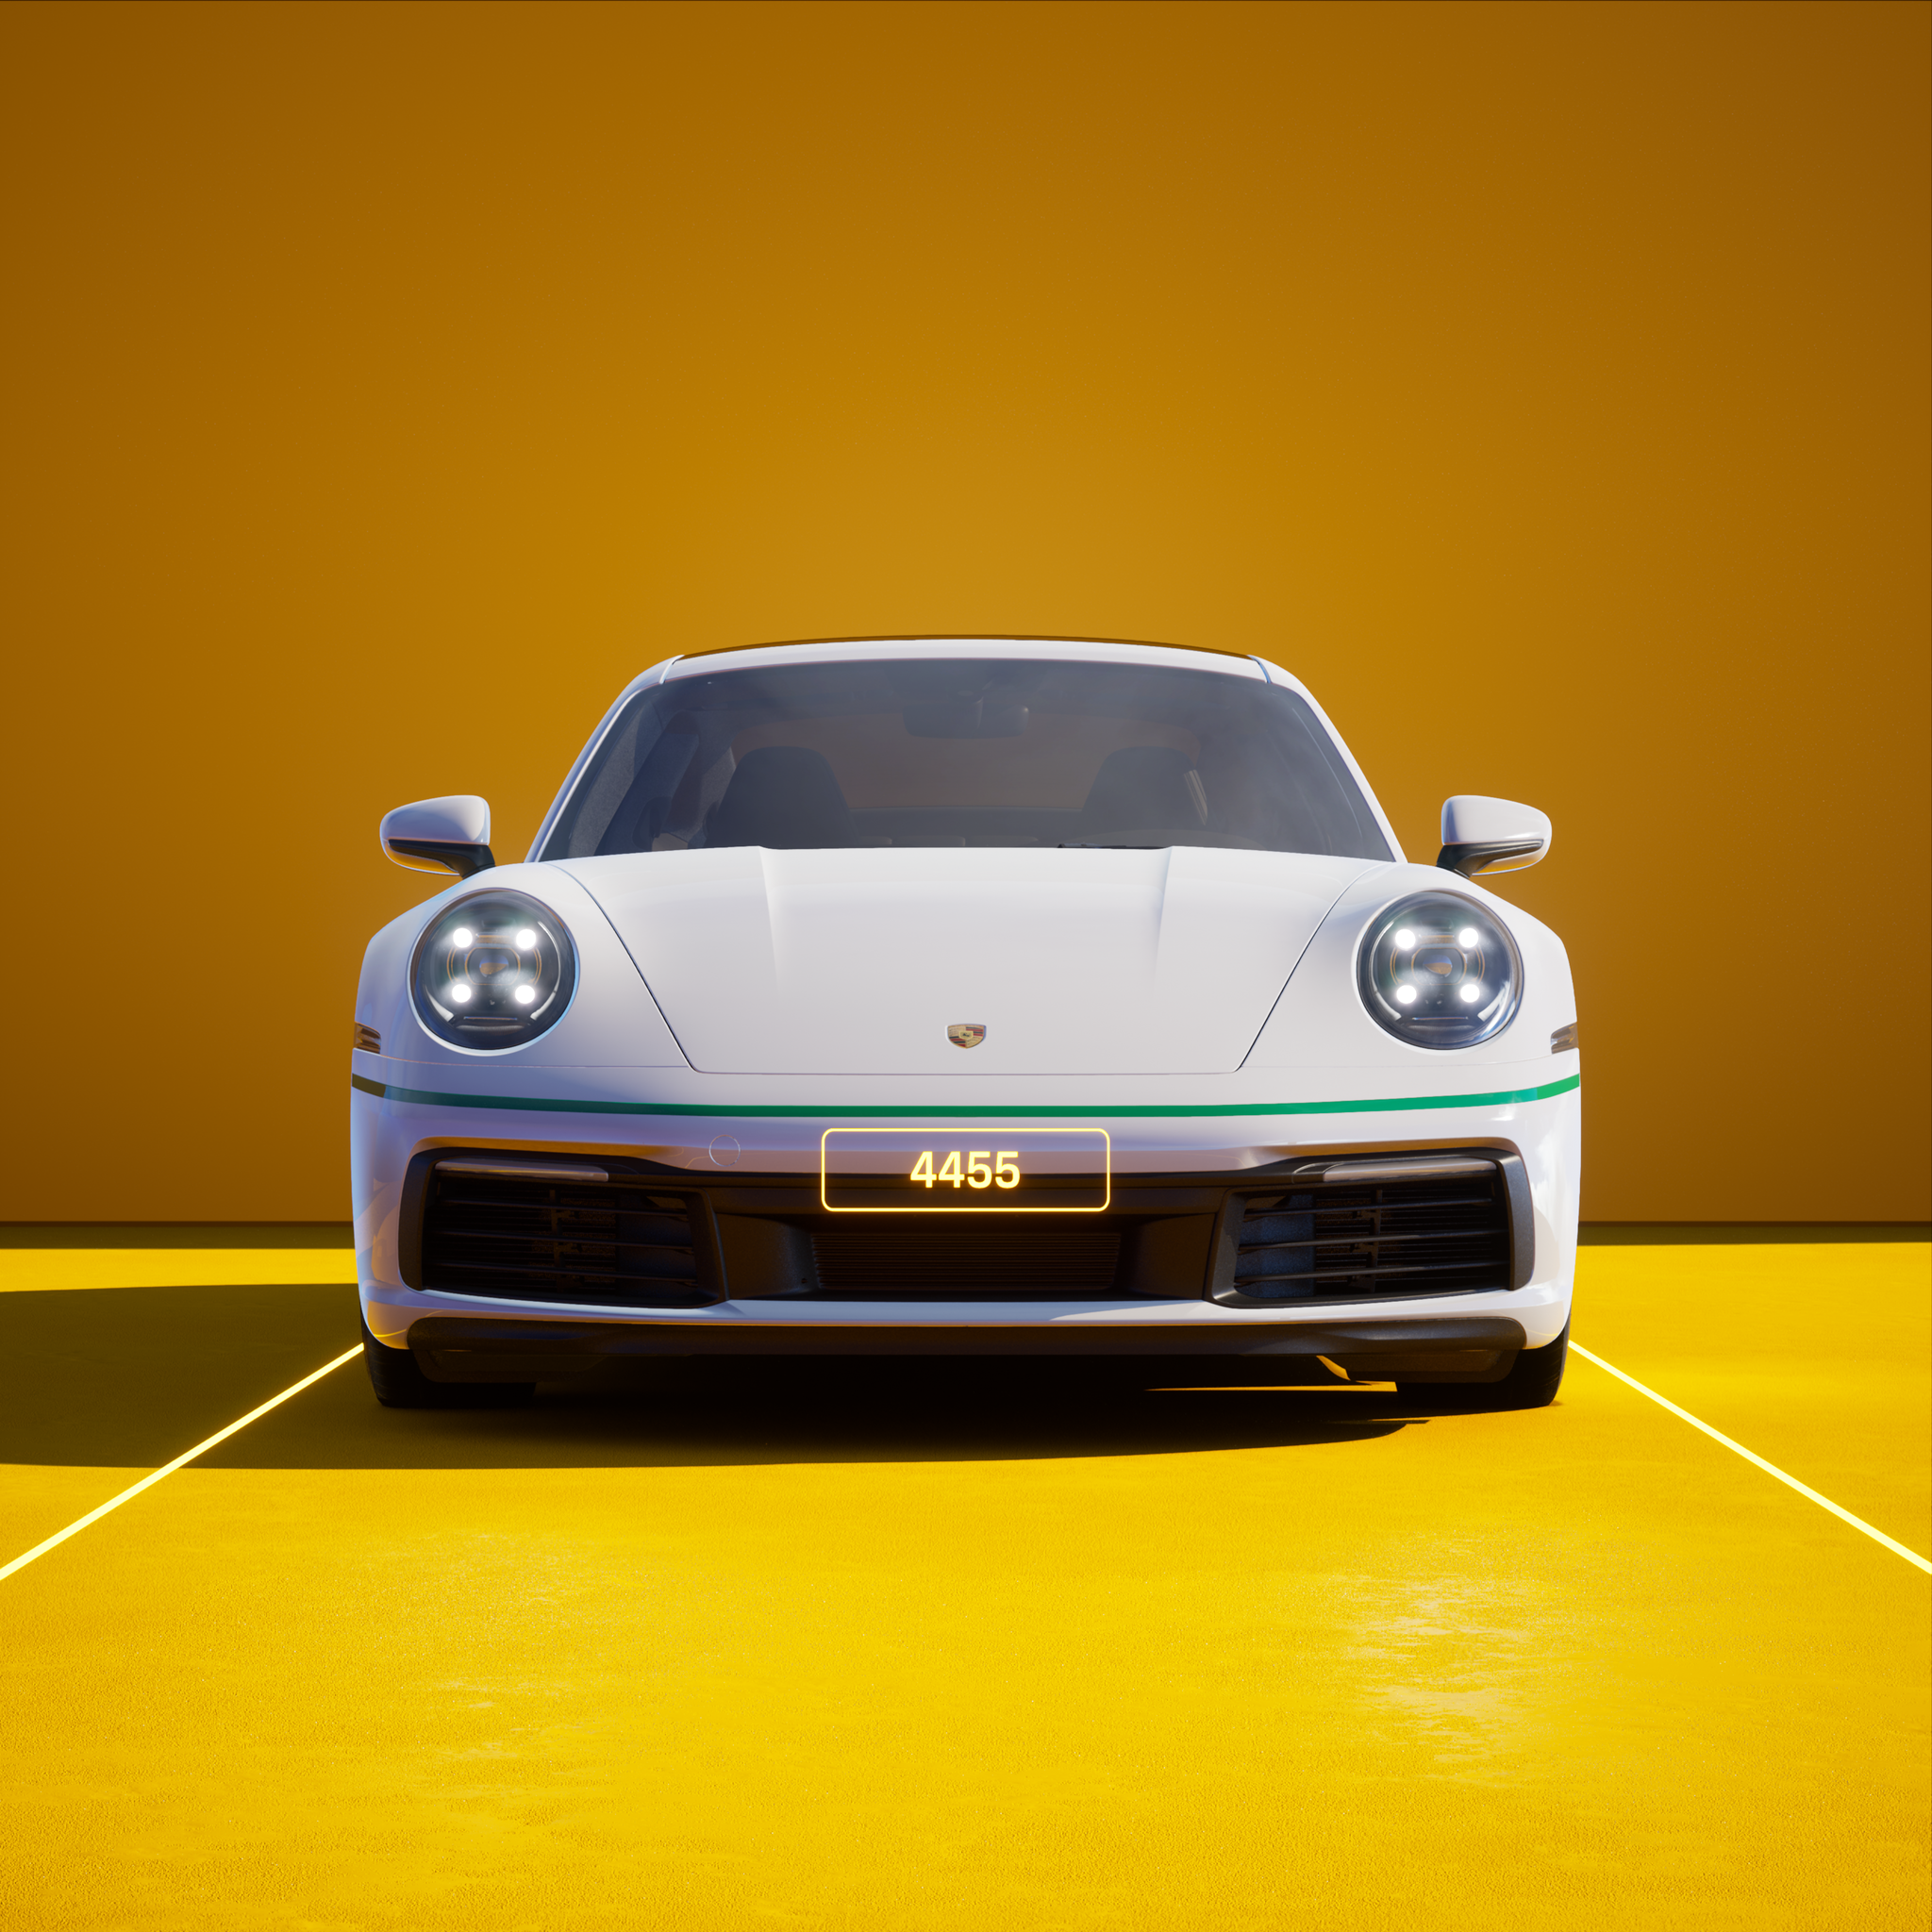 The PORSCHΞ 911 4455 image in phase